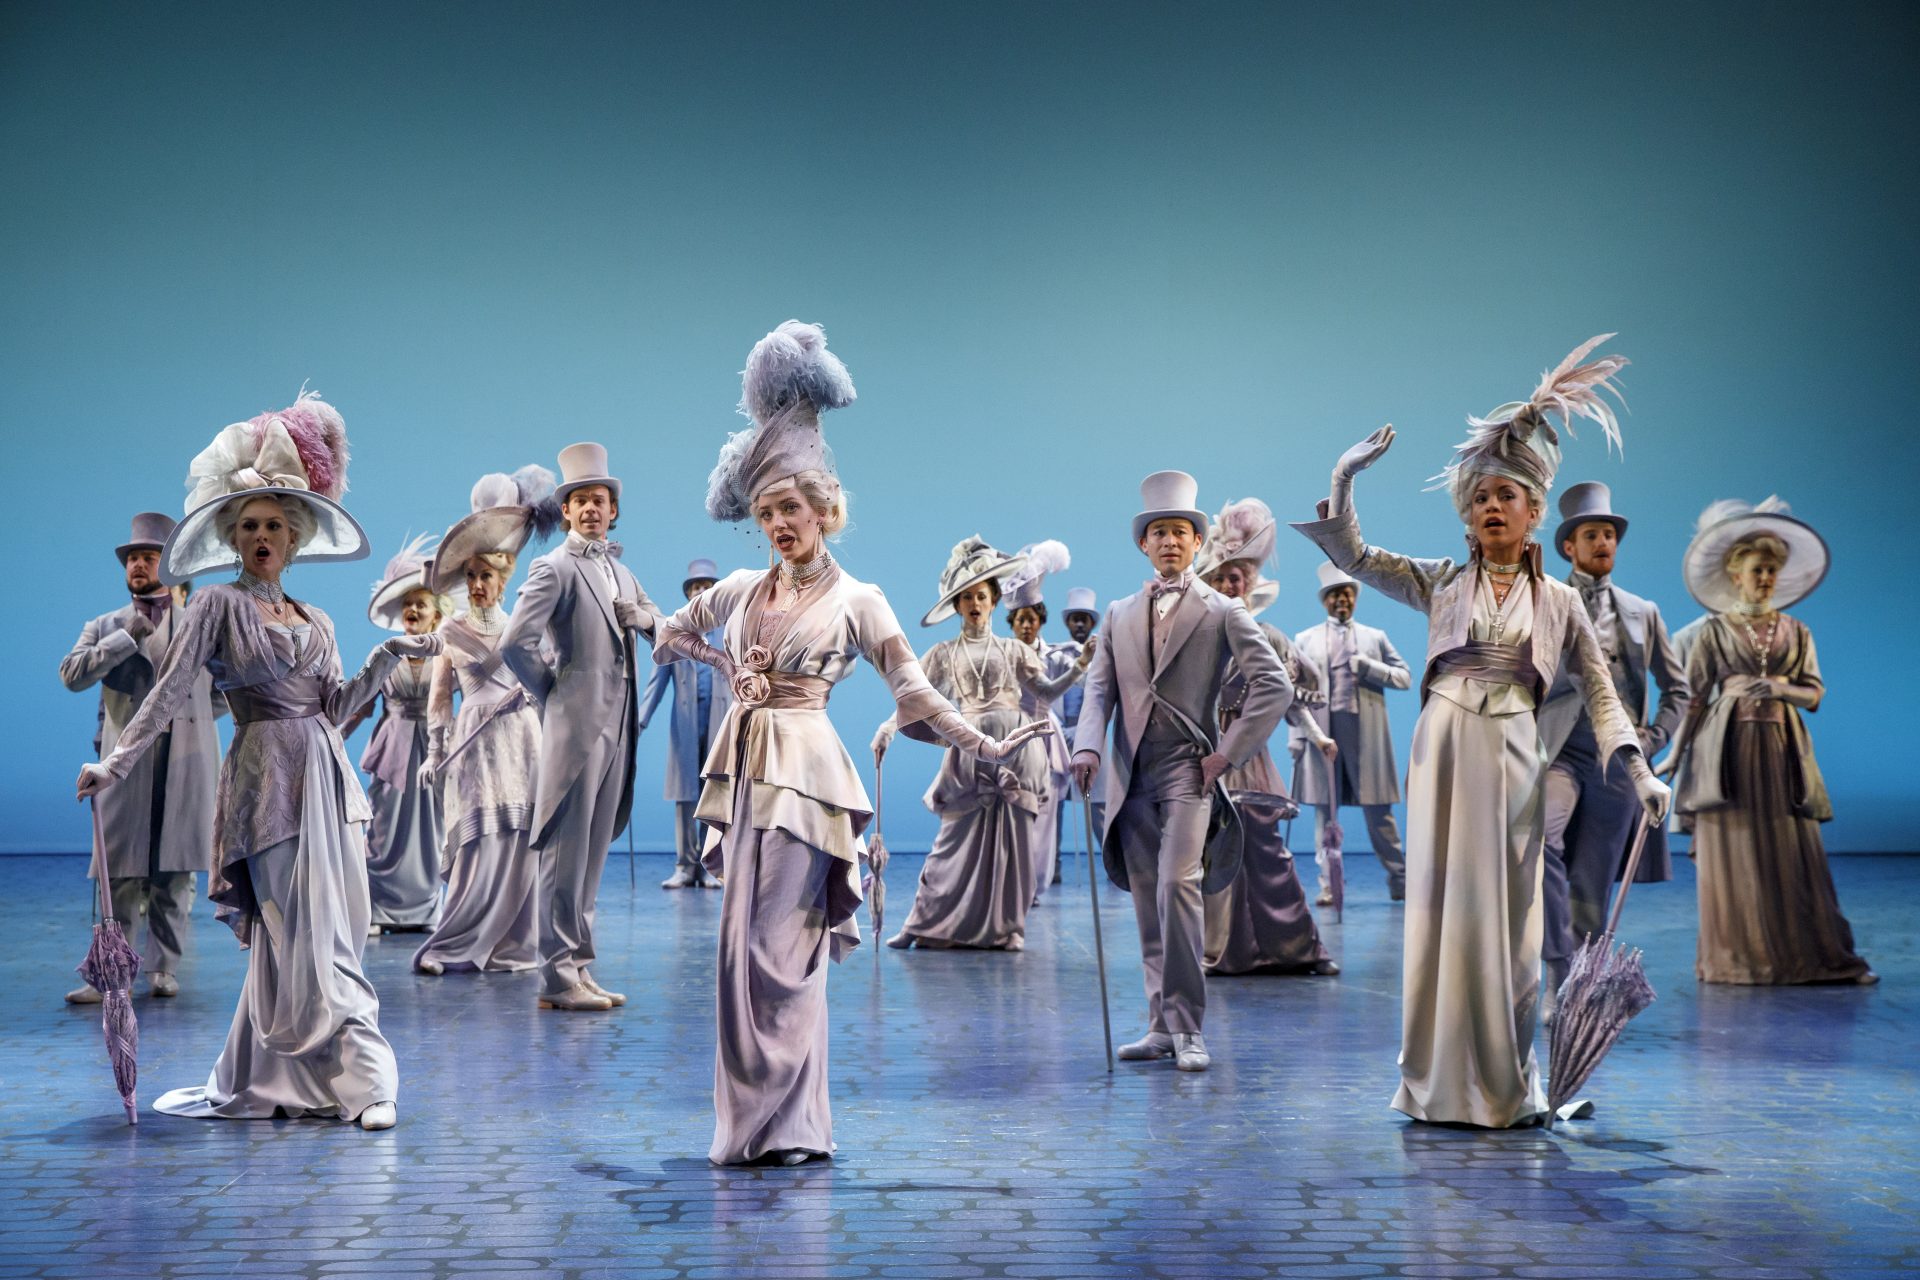 'My Fair Lady’ To Be Shown At Birmingham Hippodrome In March 2023 The